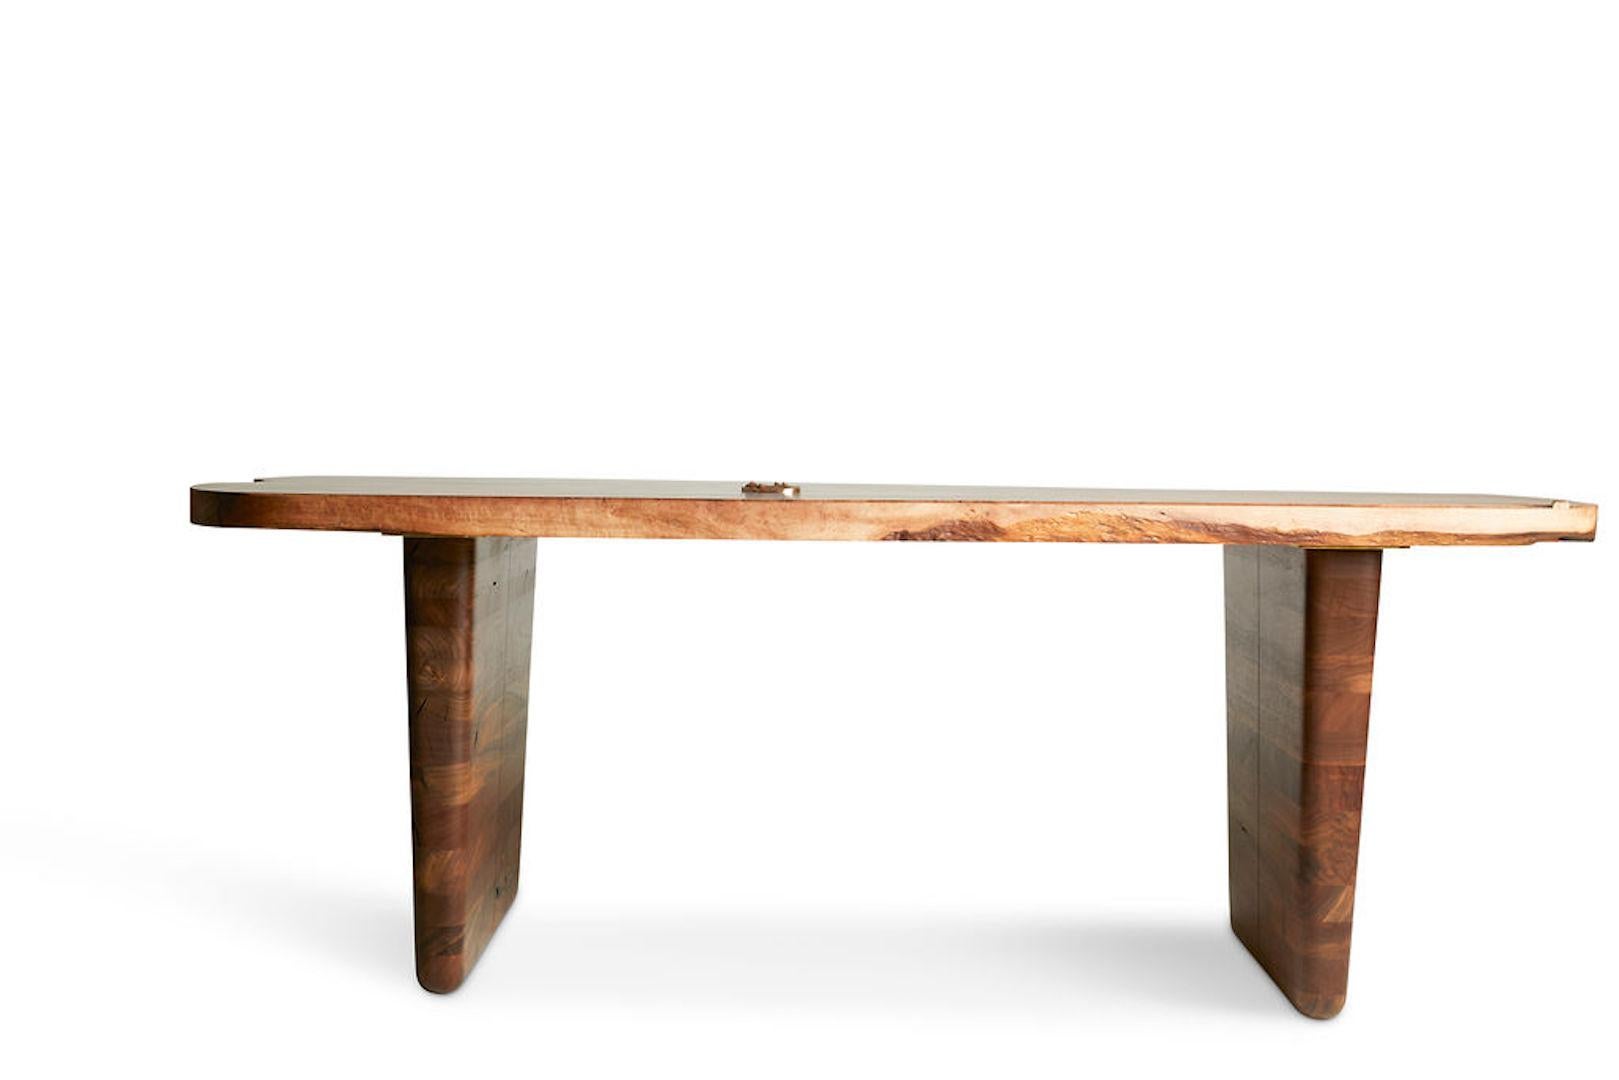 Sculptural dining table featuring a single slab claro walnut top with cast bronze inlay and bowtie. The base is made from stacked Claro, English, Bastogne, and black walnut.